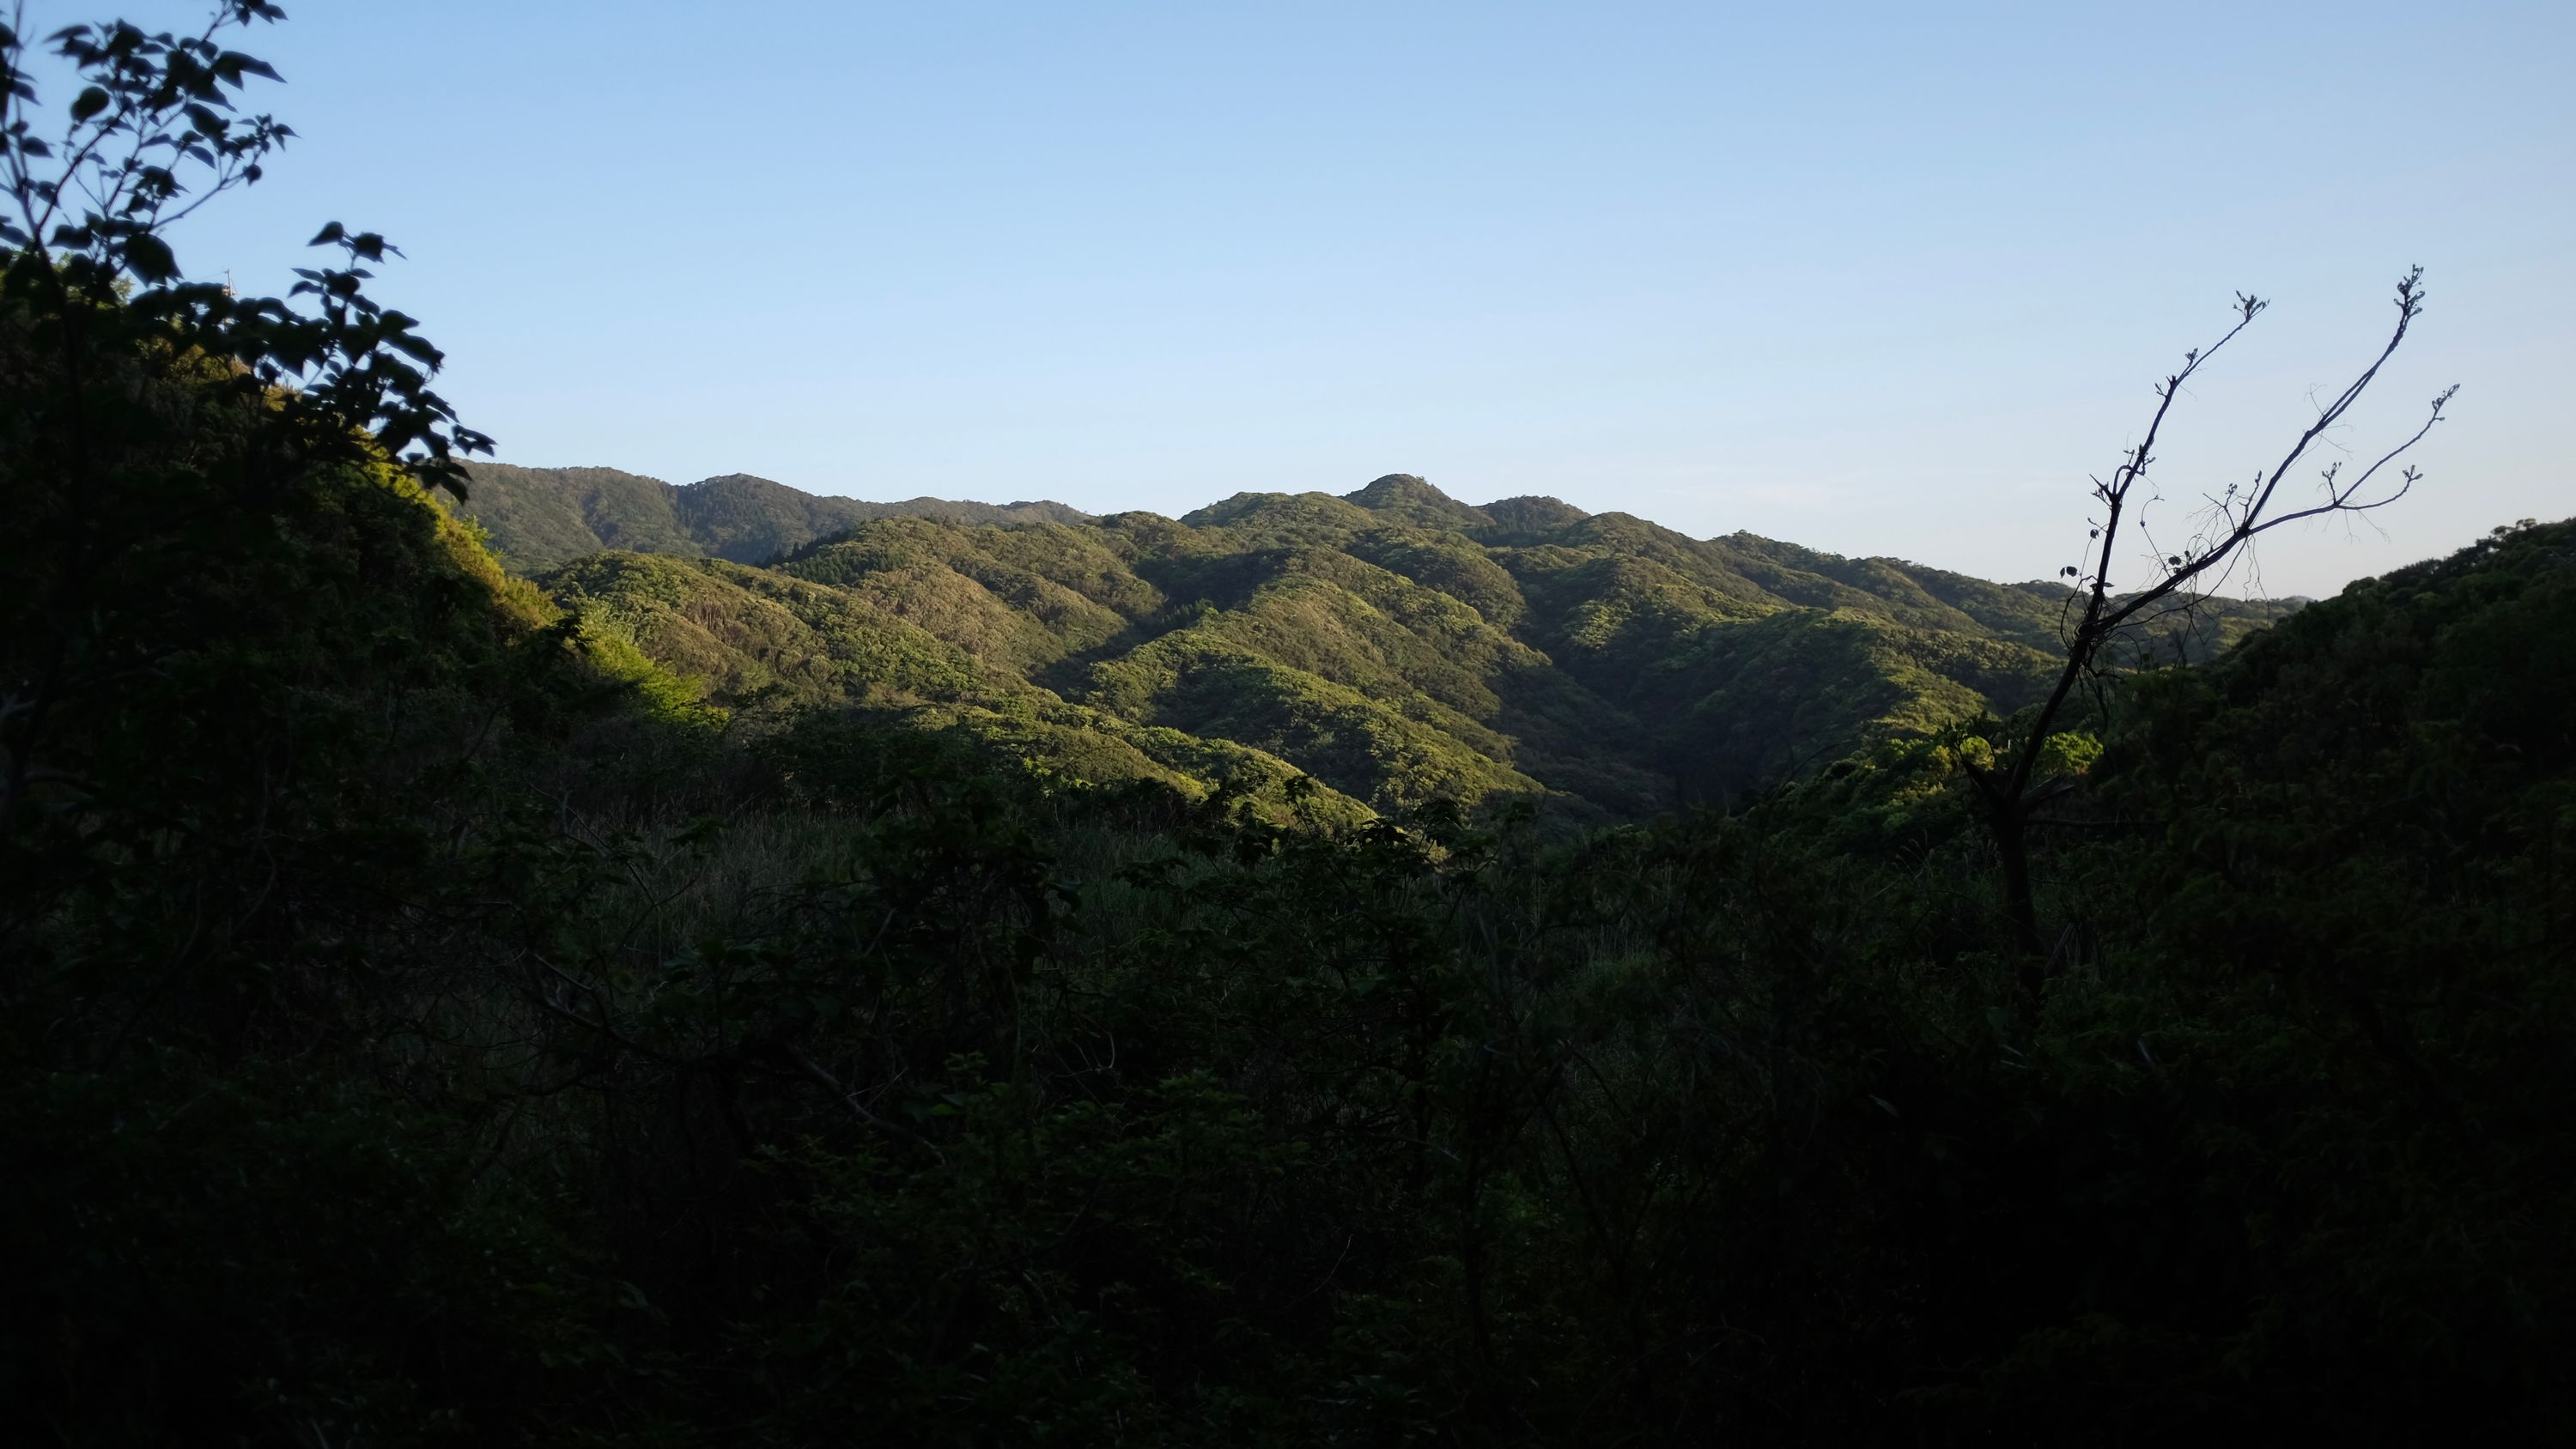 Densely wooded hills in the evening light.